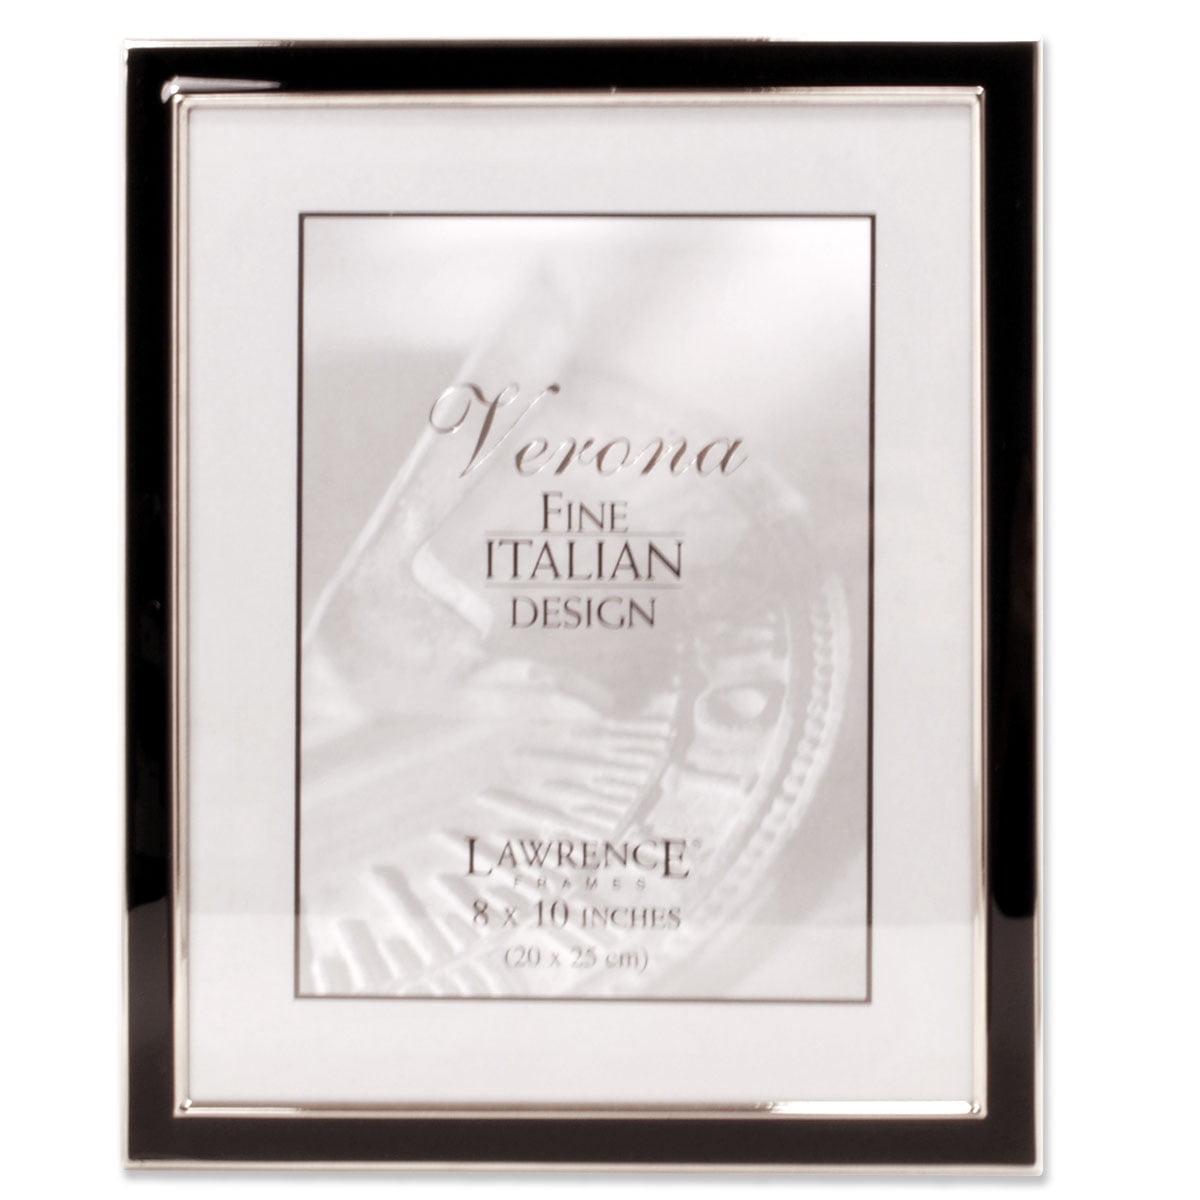 Elegant 8x10 Black and Silver Metal Tabletop and Wall Picture Frame